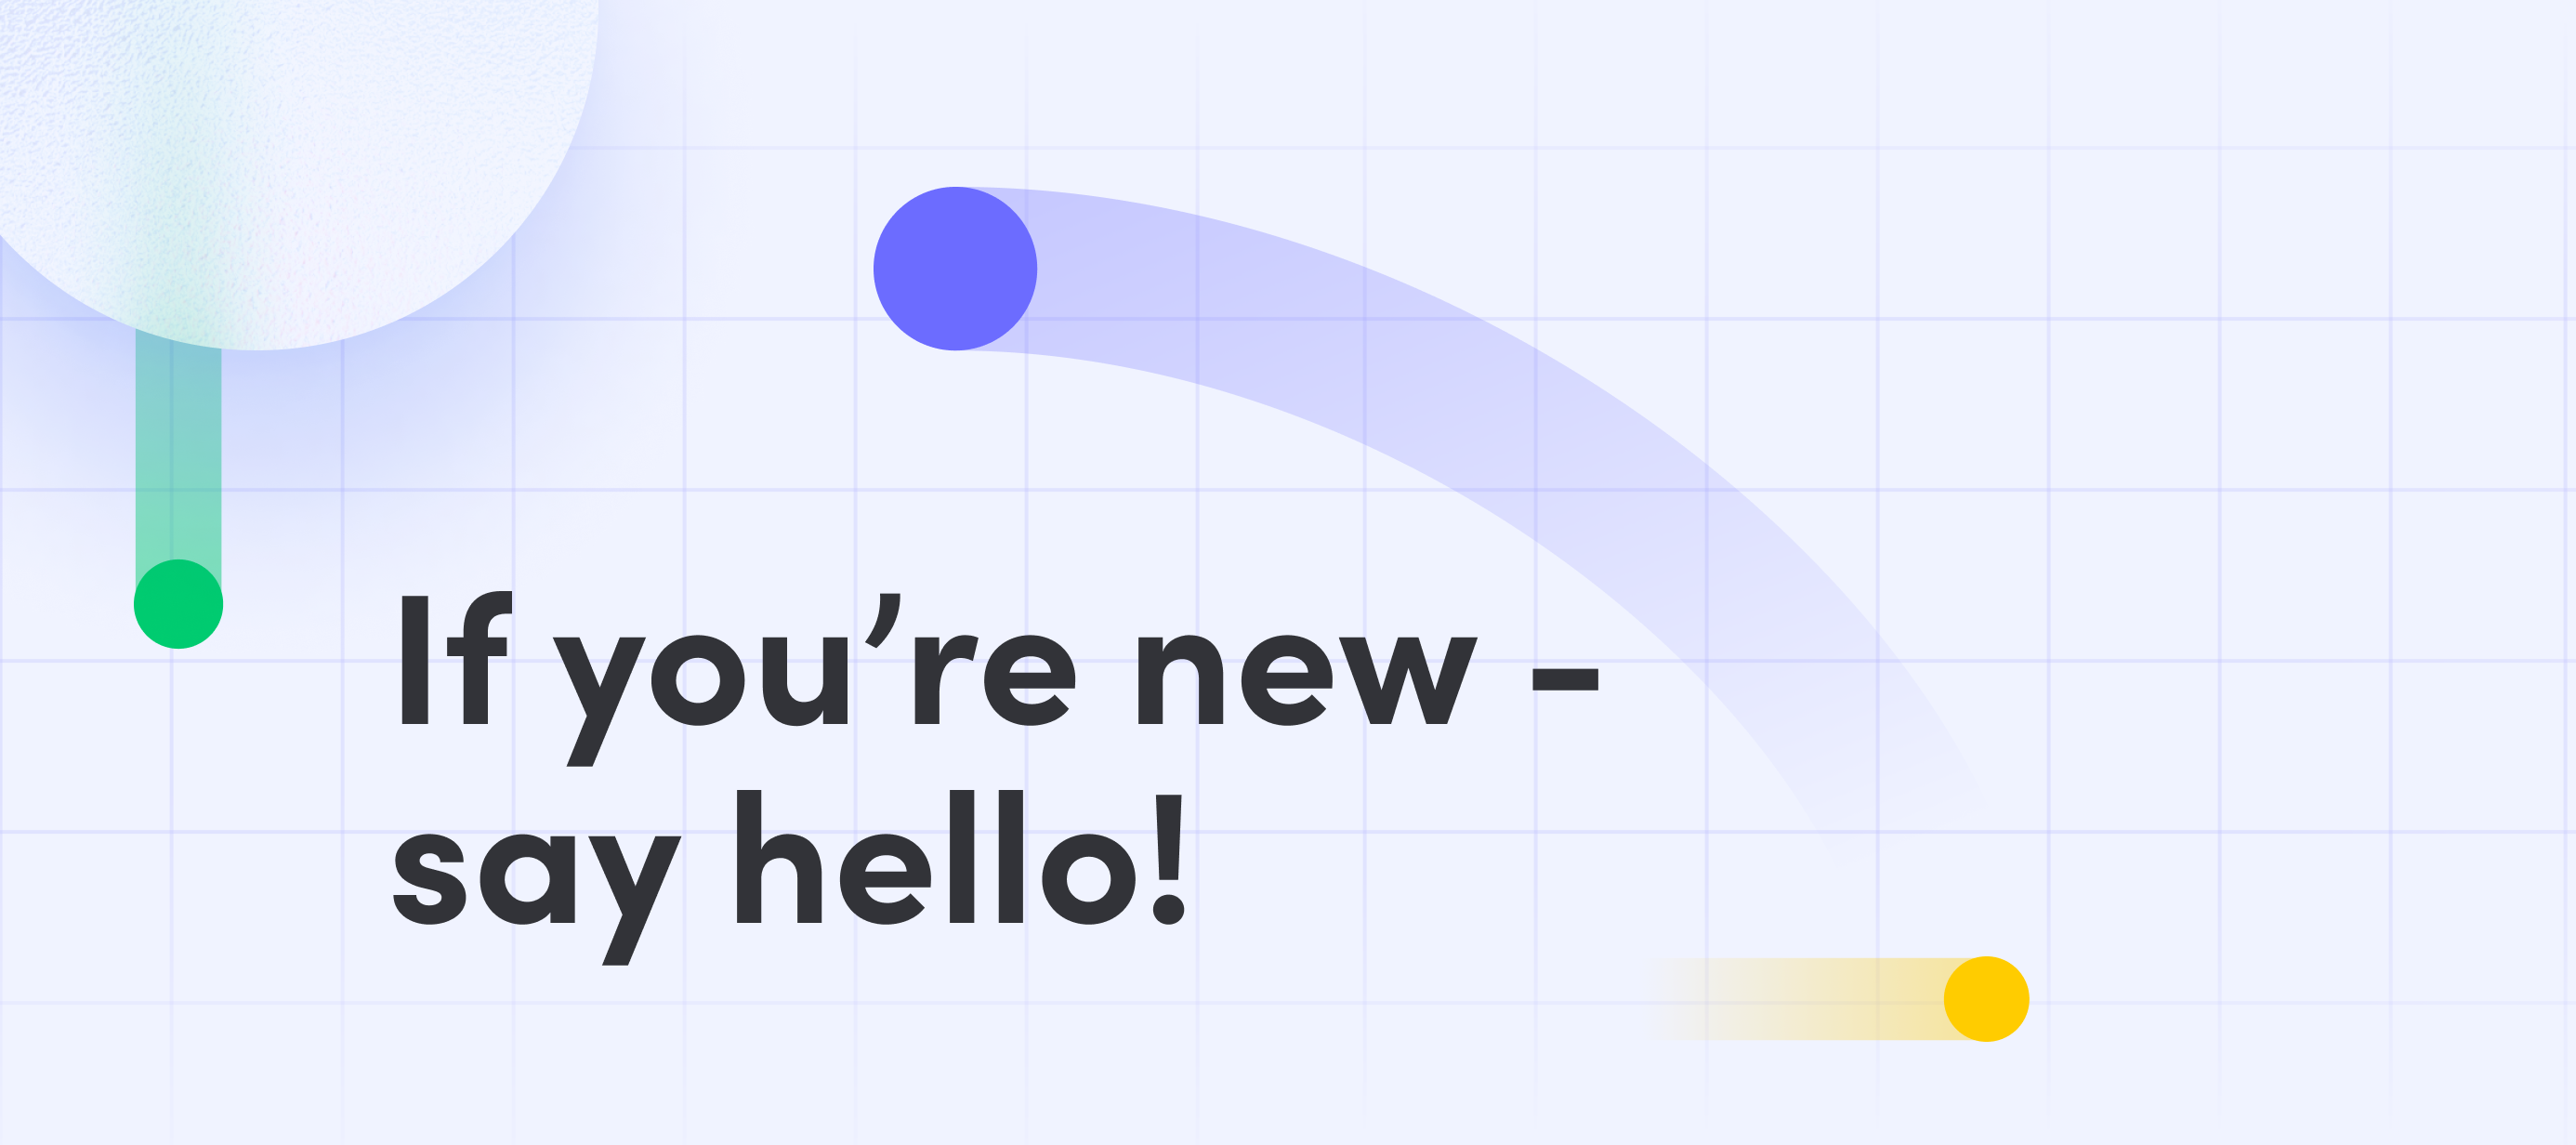 If you're new - say hello!